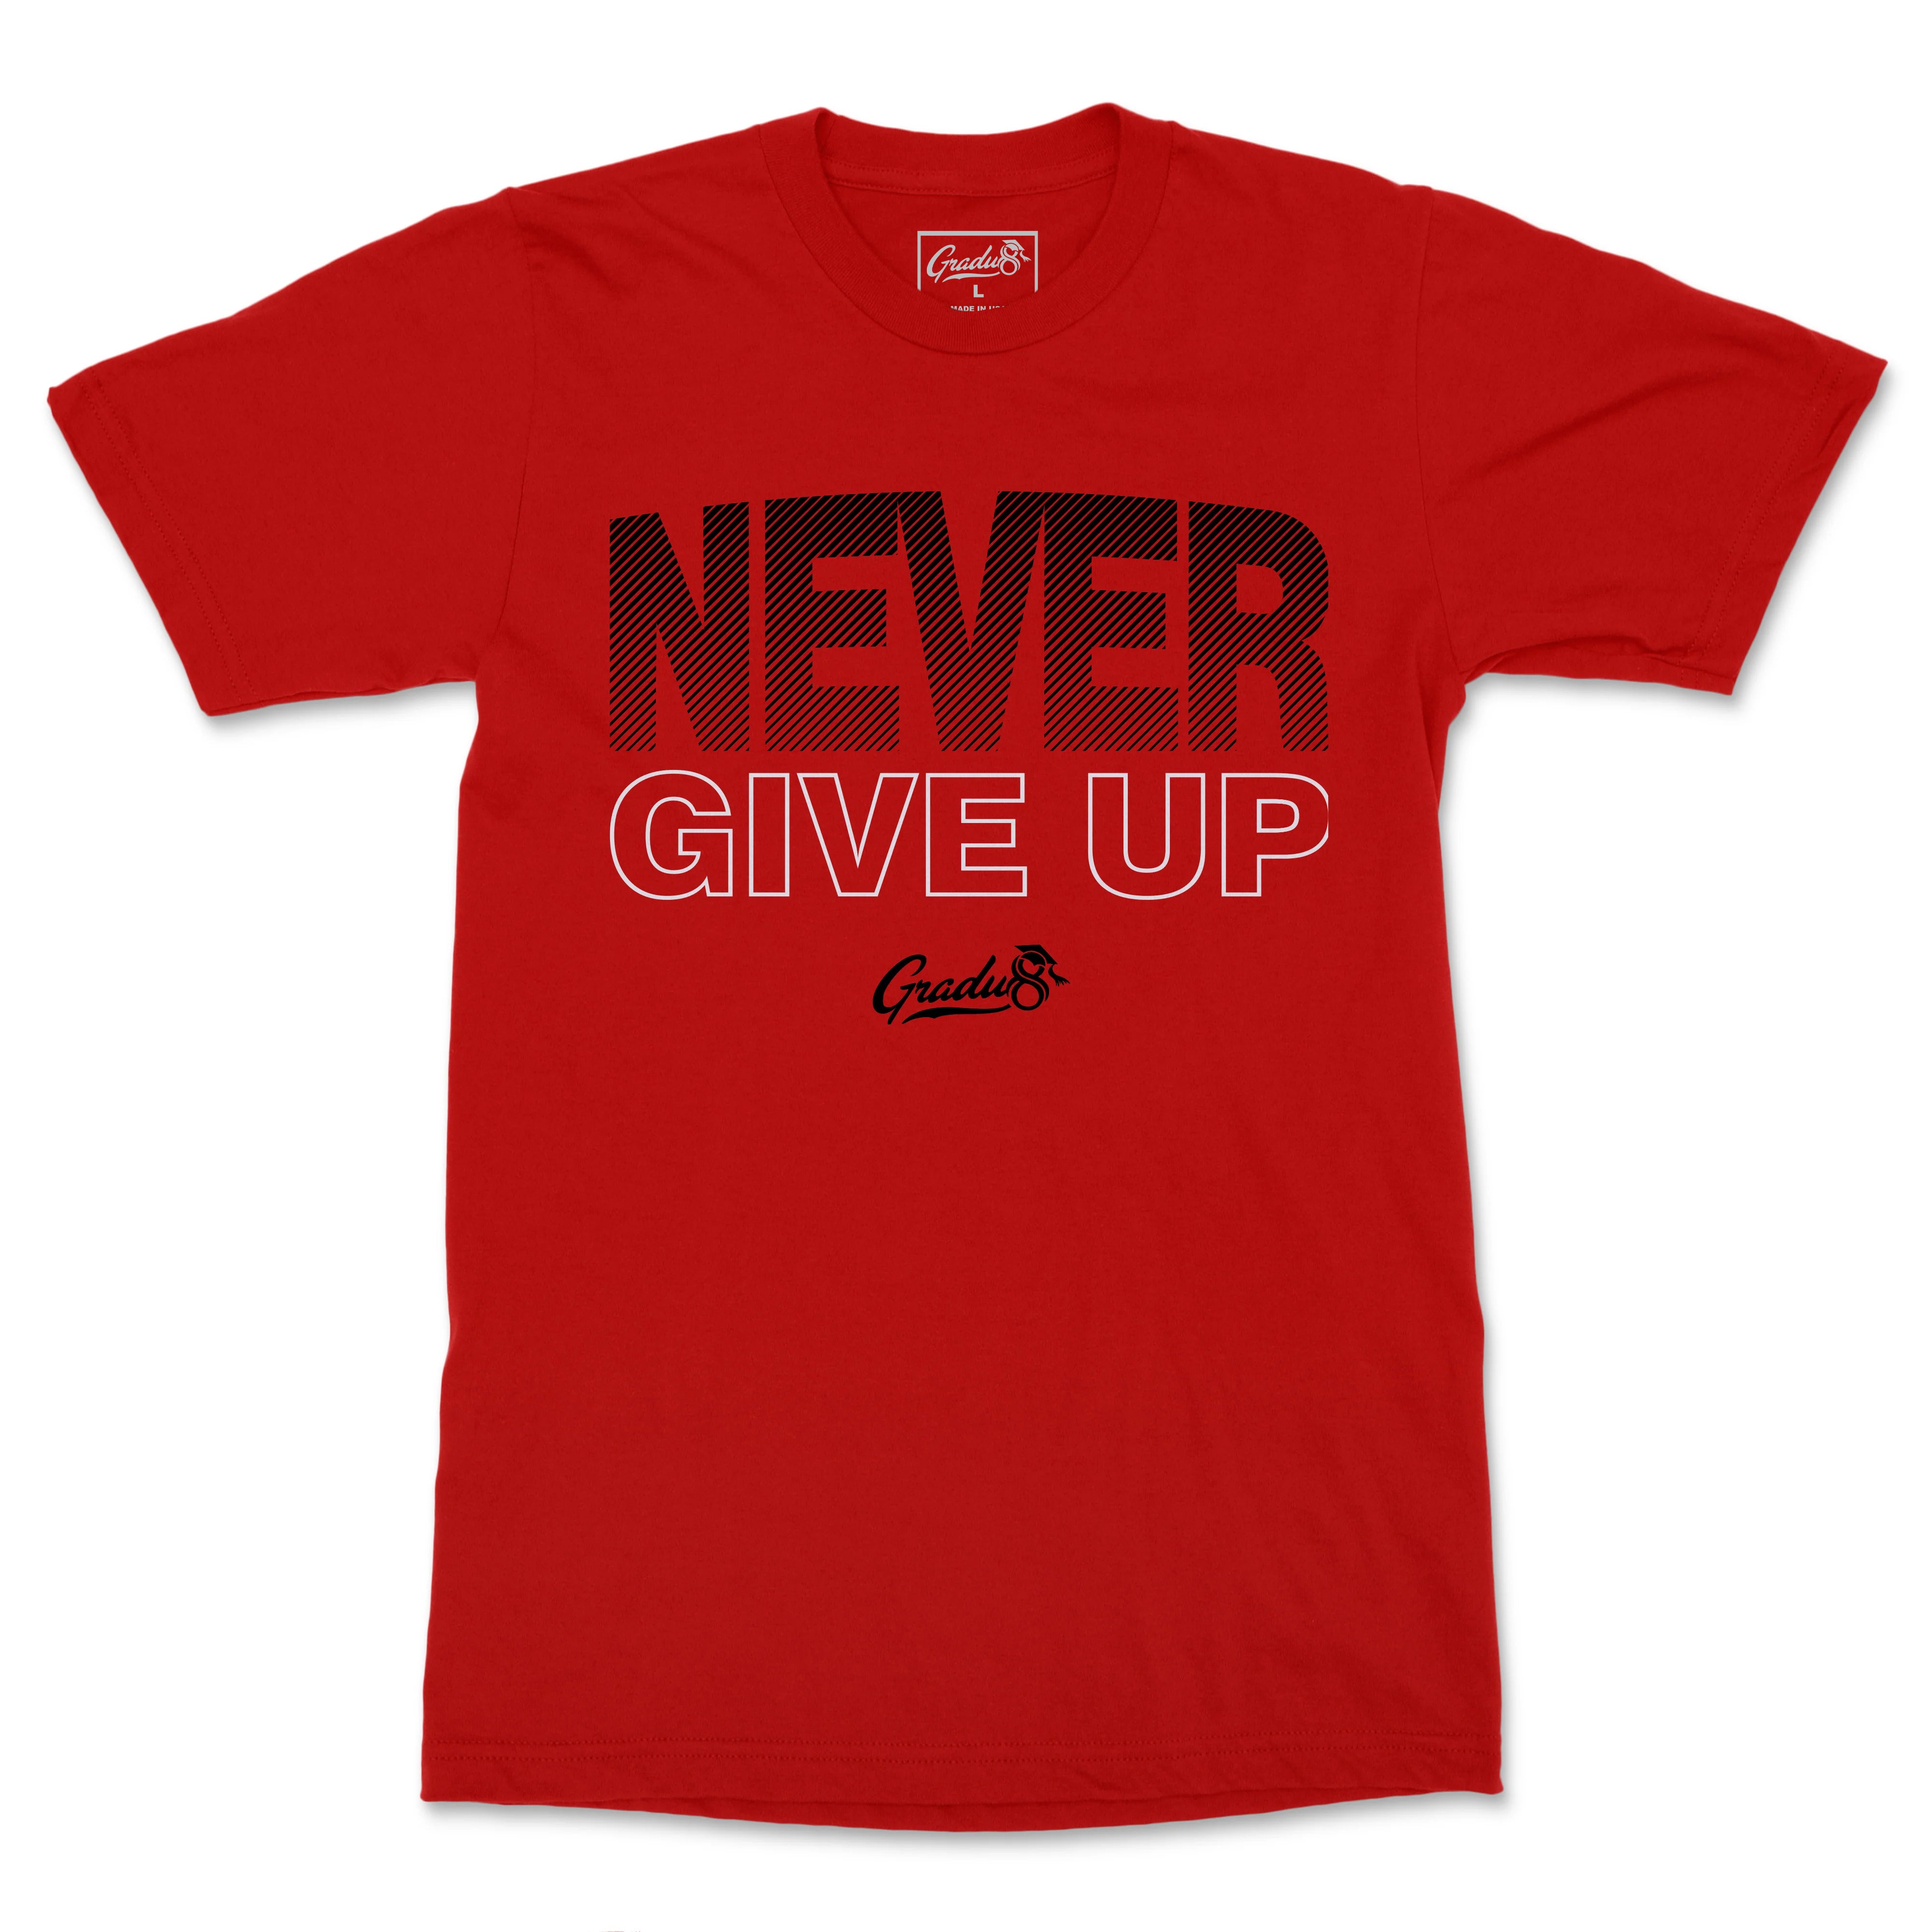 NEVER GIVE UP Premium T-shirt - Red